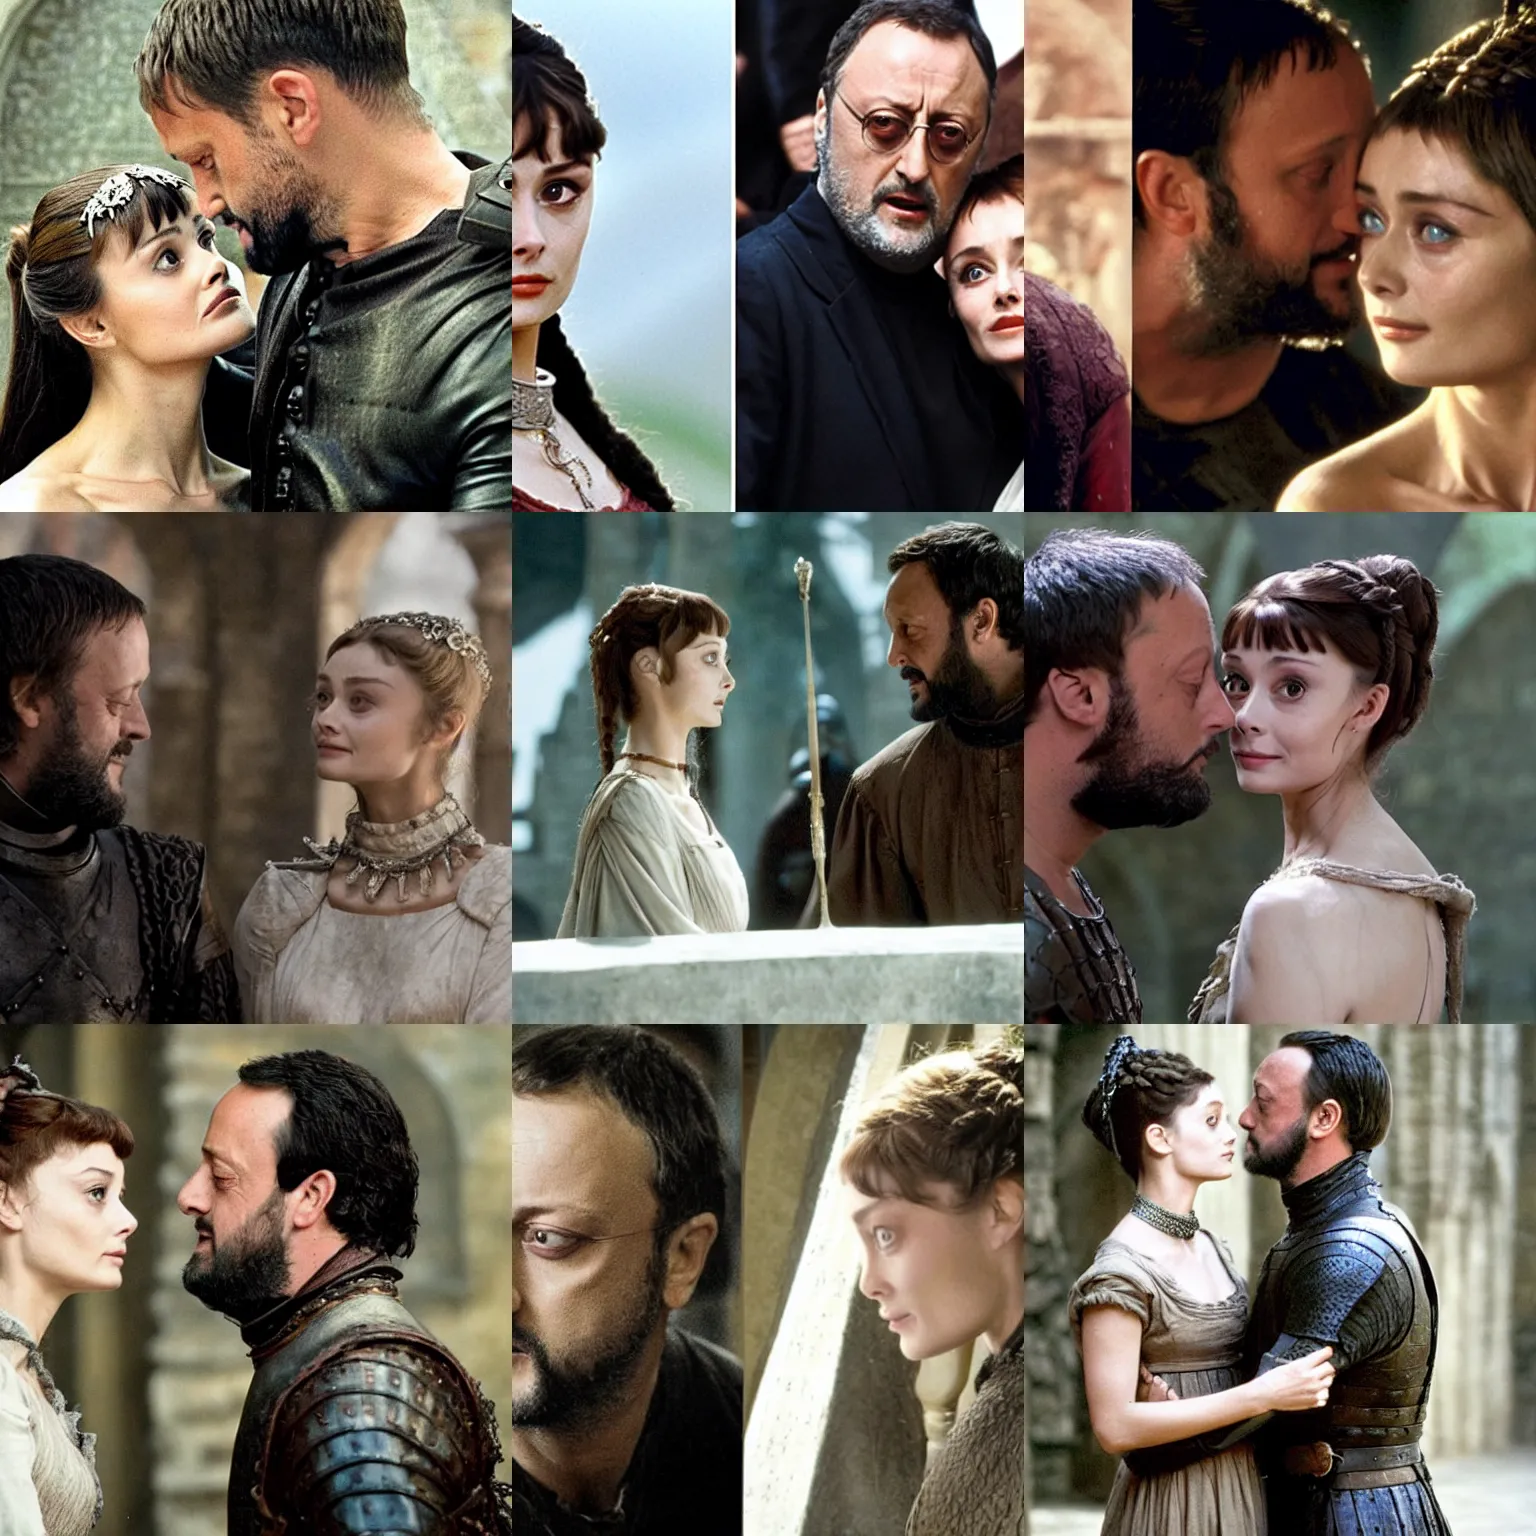 Prompt: In the 15th century Romeo (Jean Reno) and Juliet (Audrey Hepburn), are looking at each other romantically in Game of Thrones, HBO series, directed by Denis Villeneuve